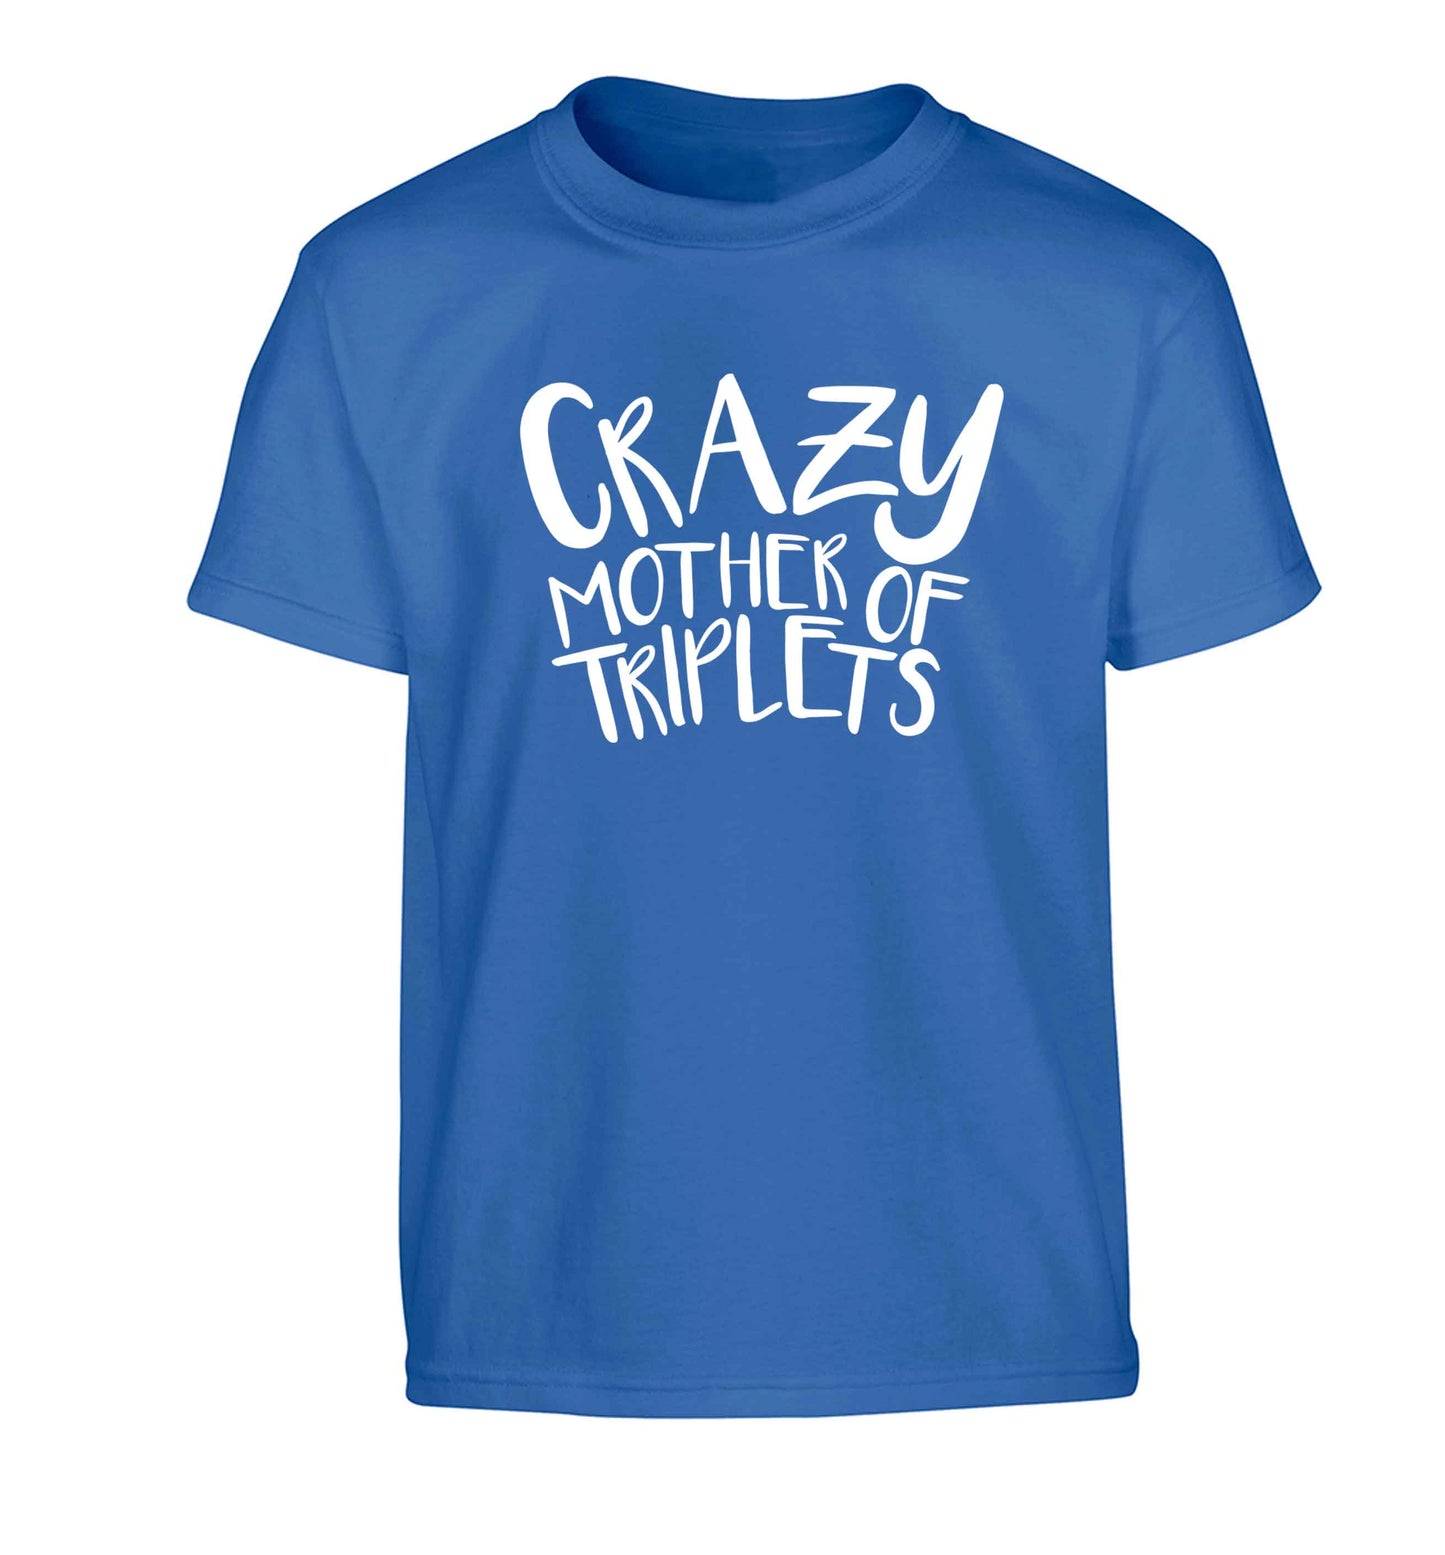 Crazy mother of triplets Children's blue Tshirt 12-13 Years